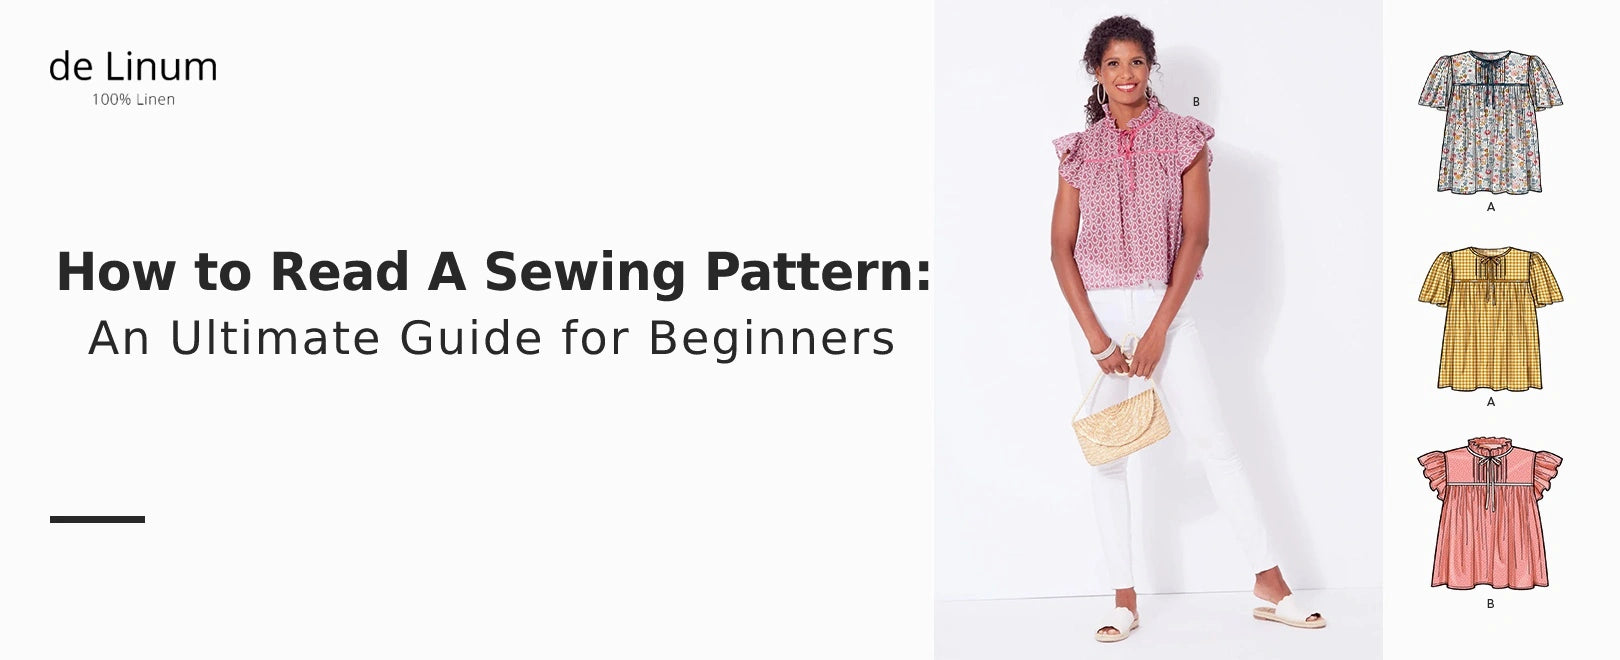 The Sewing Pattern Tutorials 11: pattern symbols and fabric